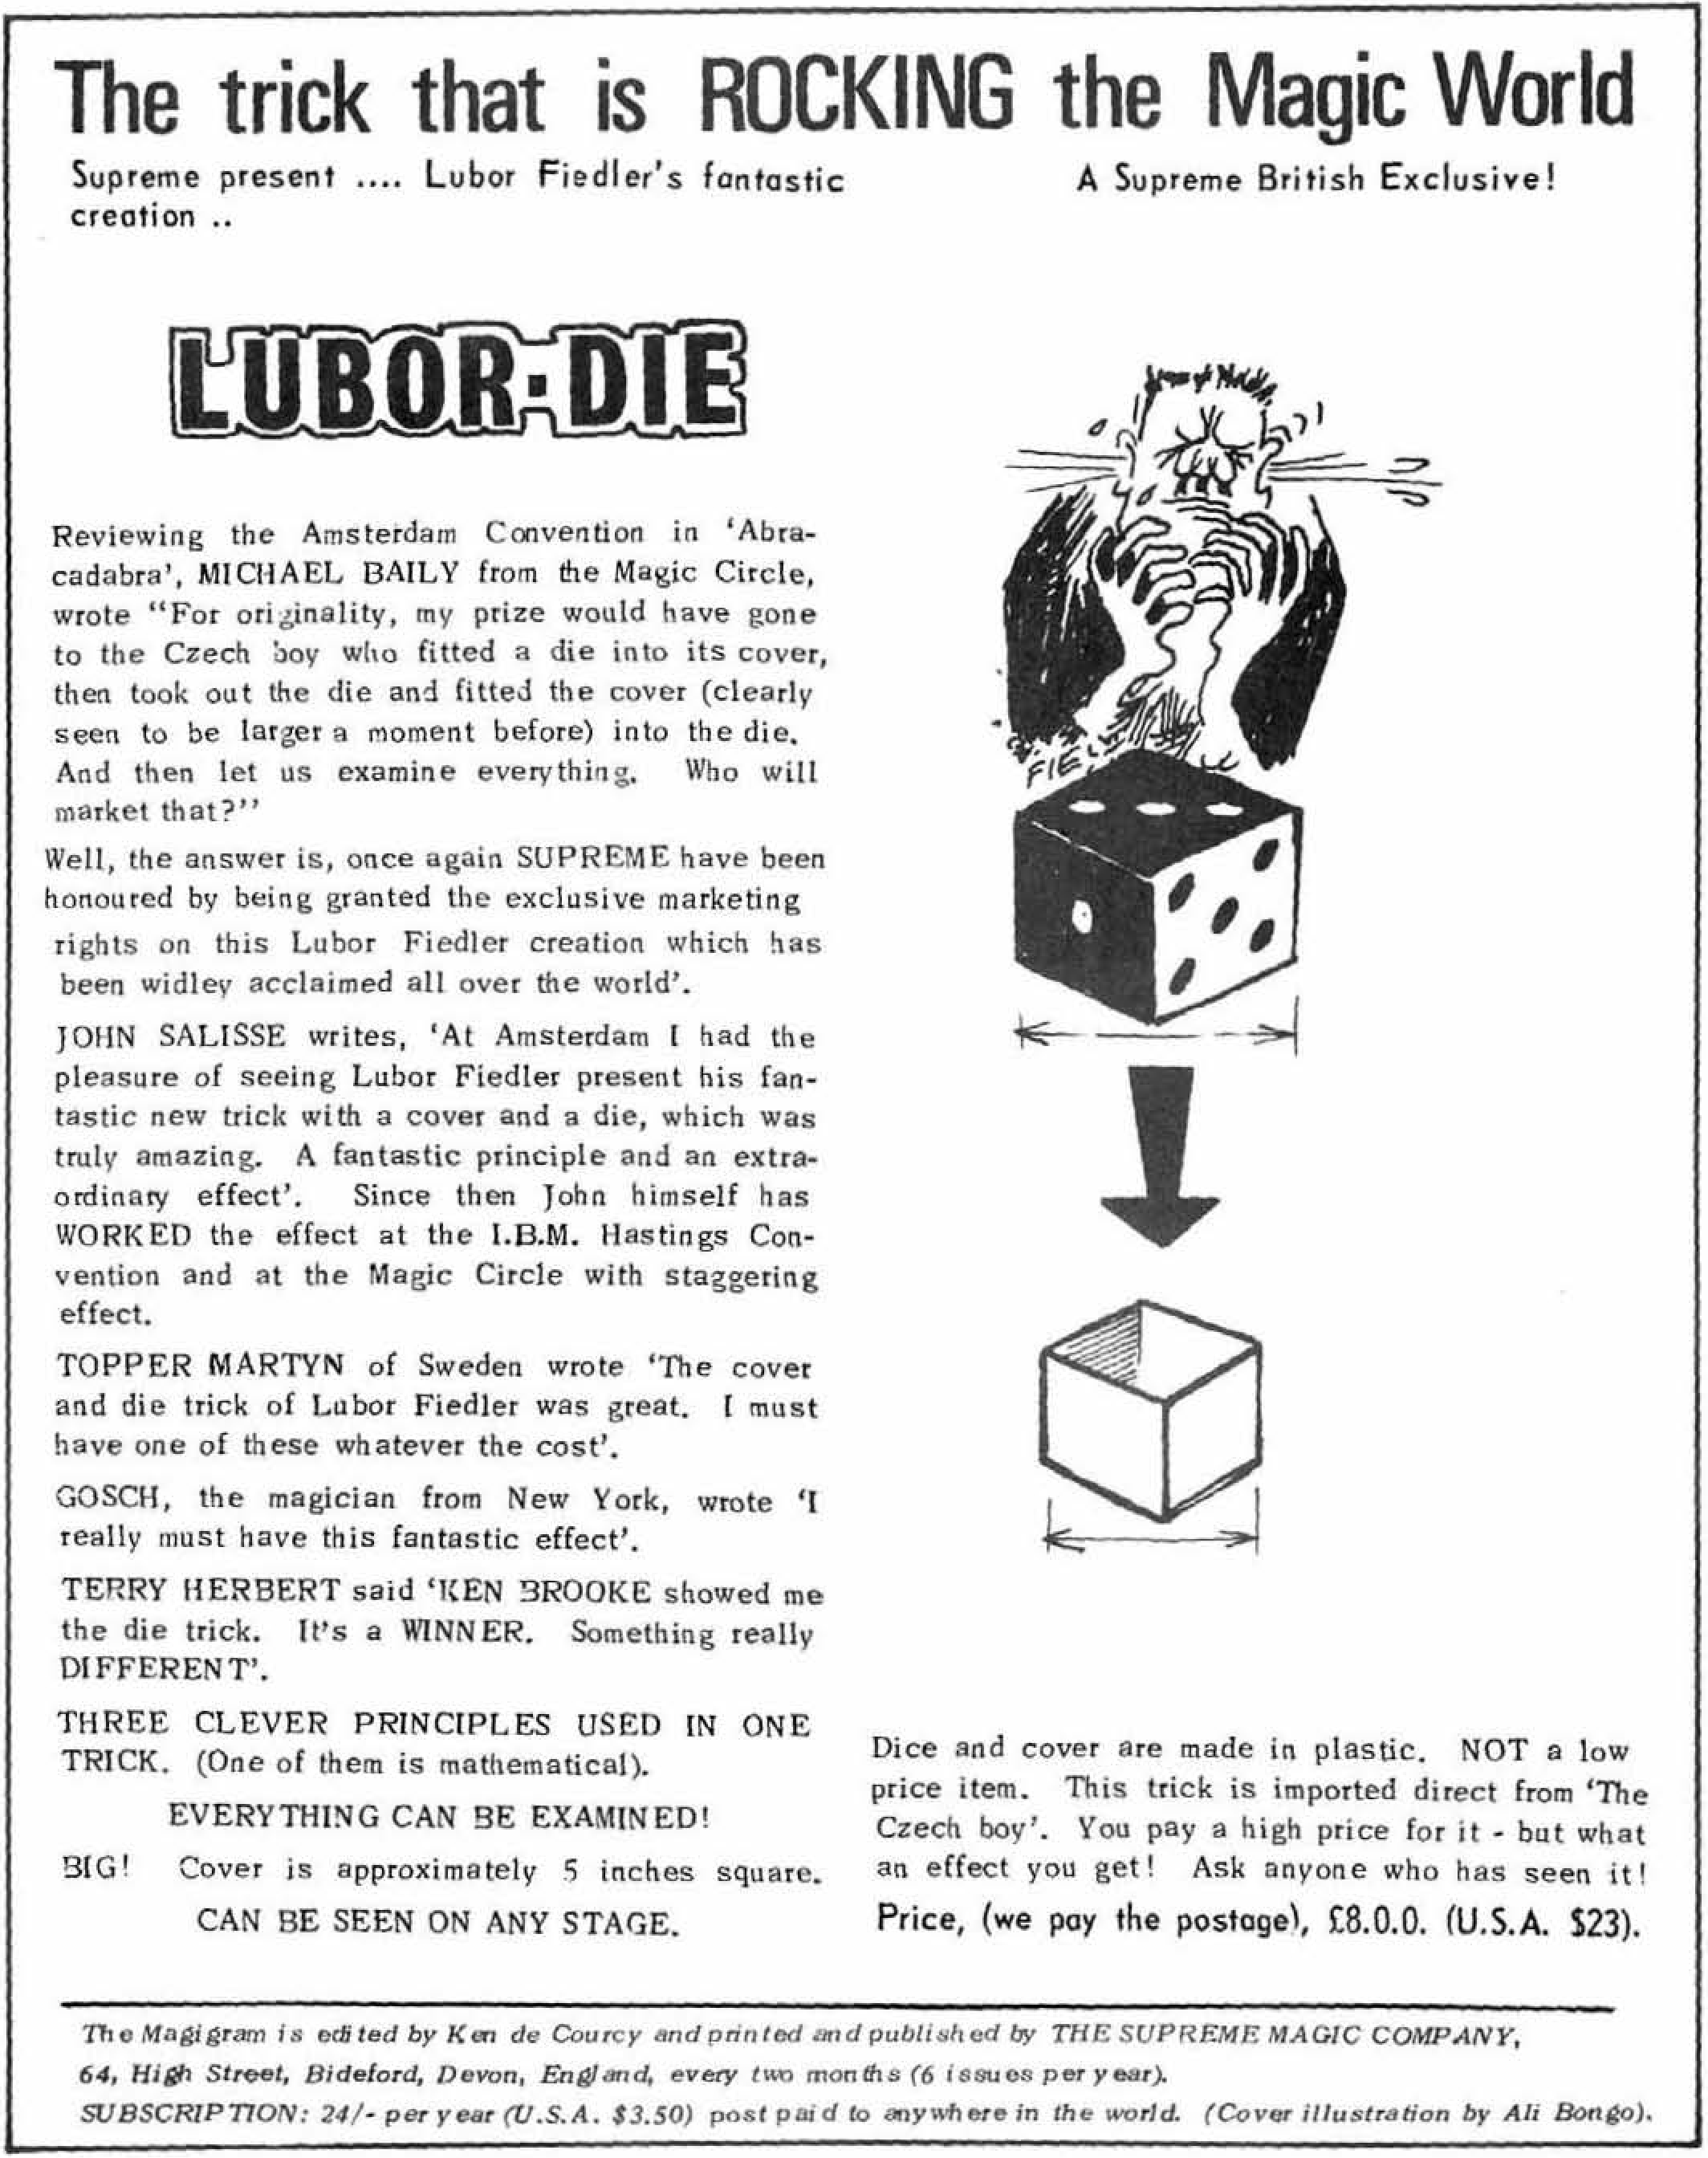 File:First advertisement for Lubor Die in 1971 Magigram.png